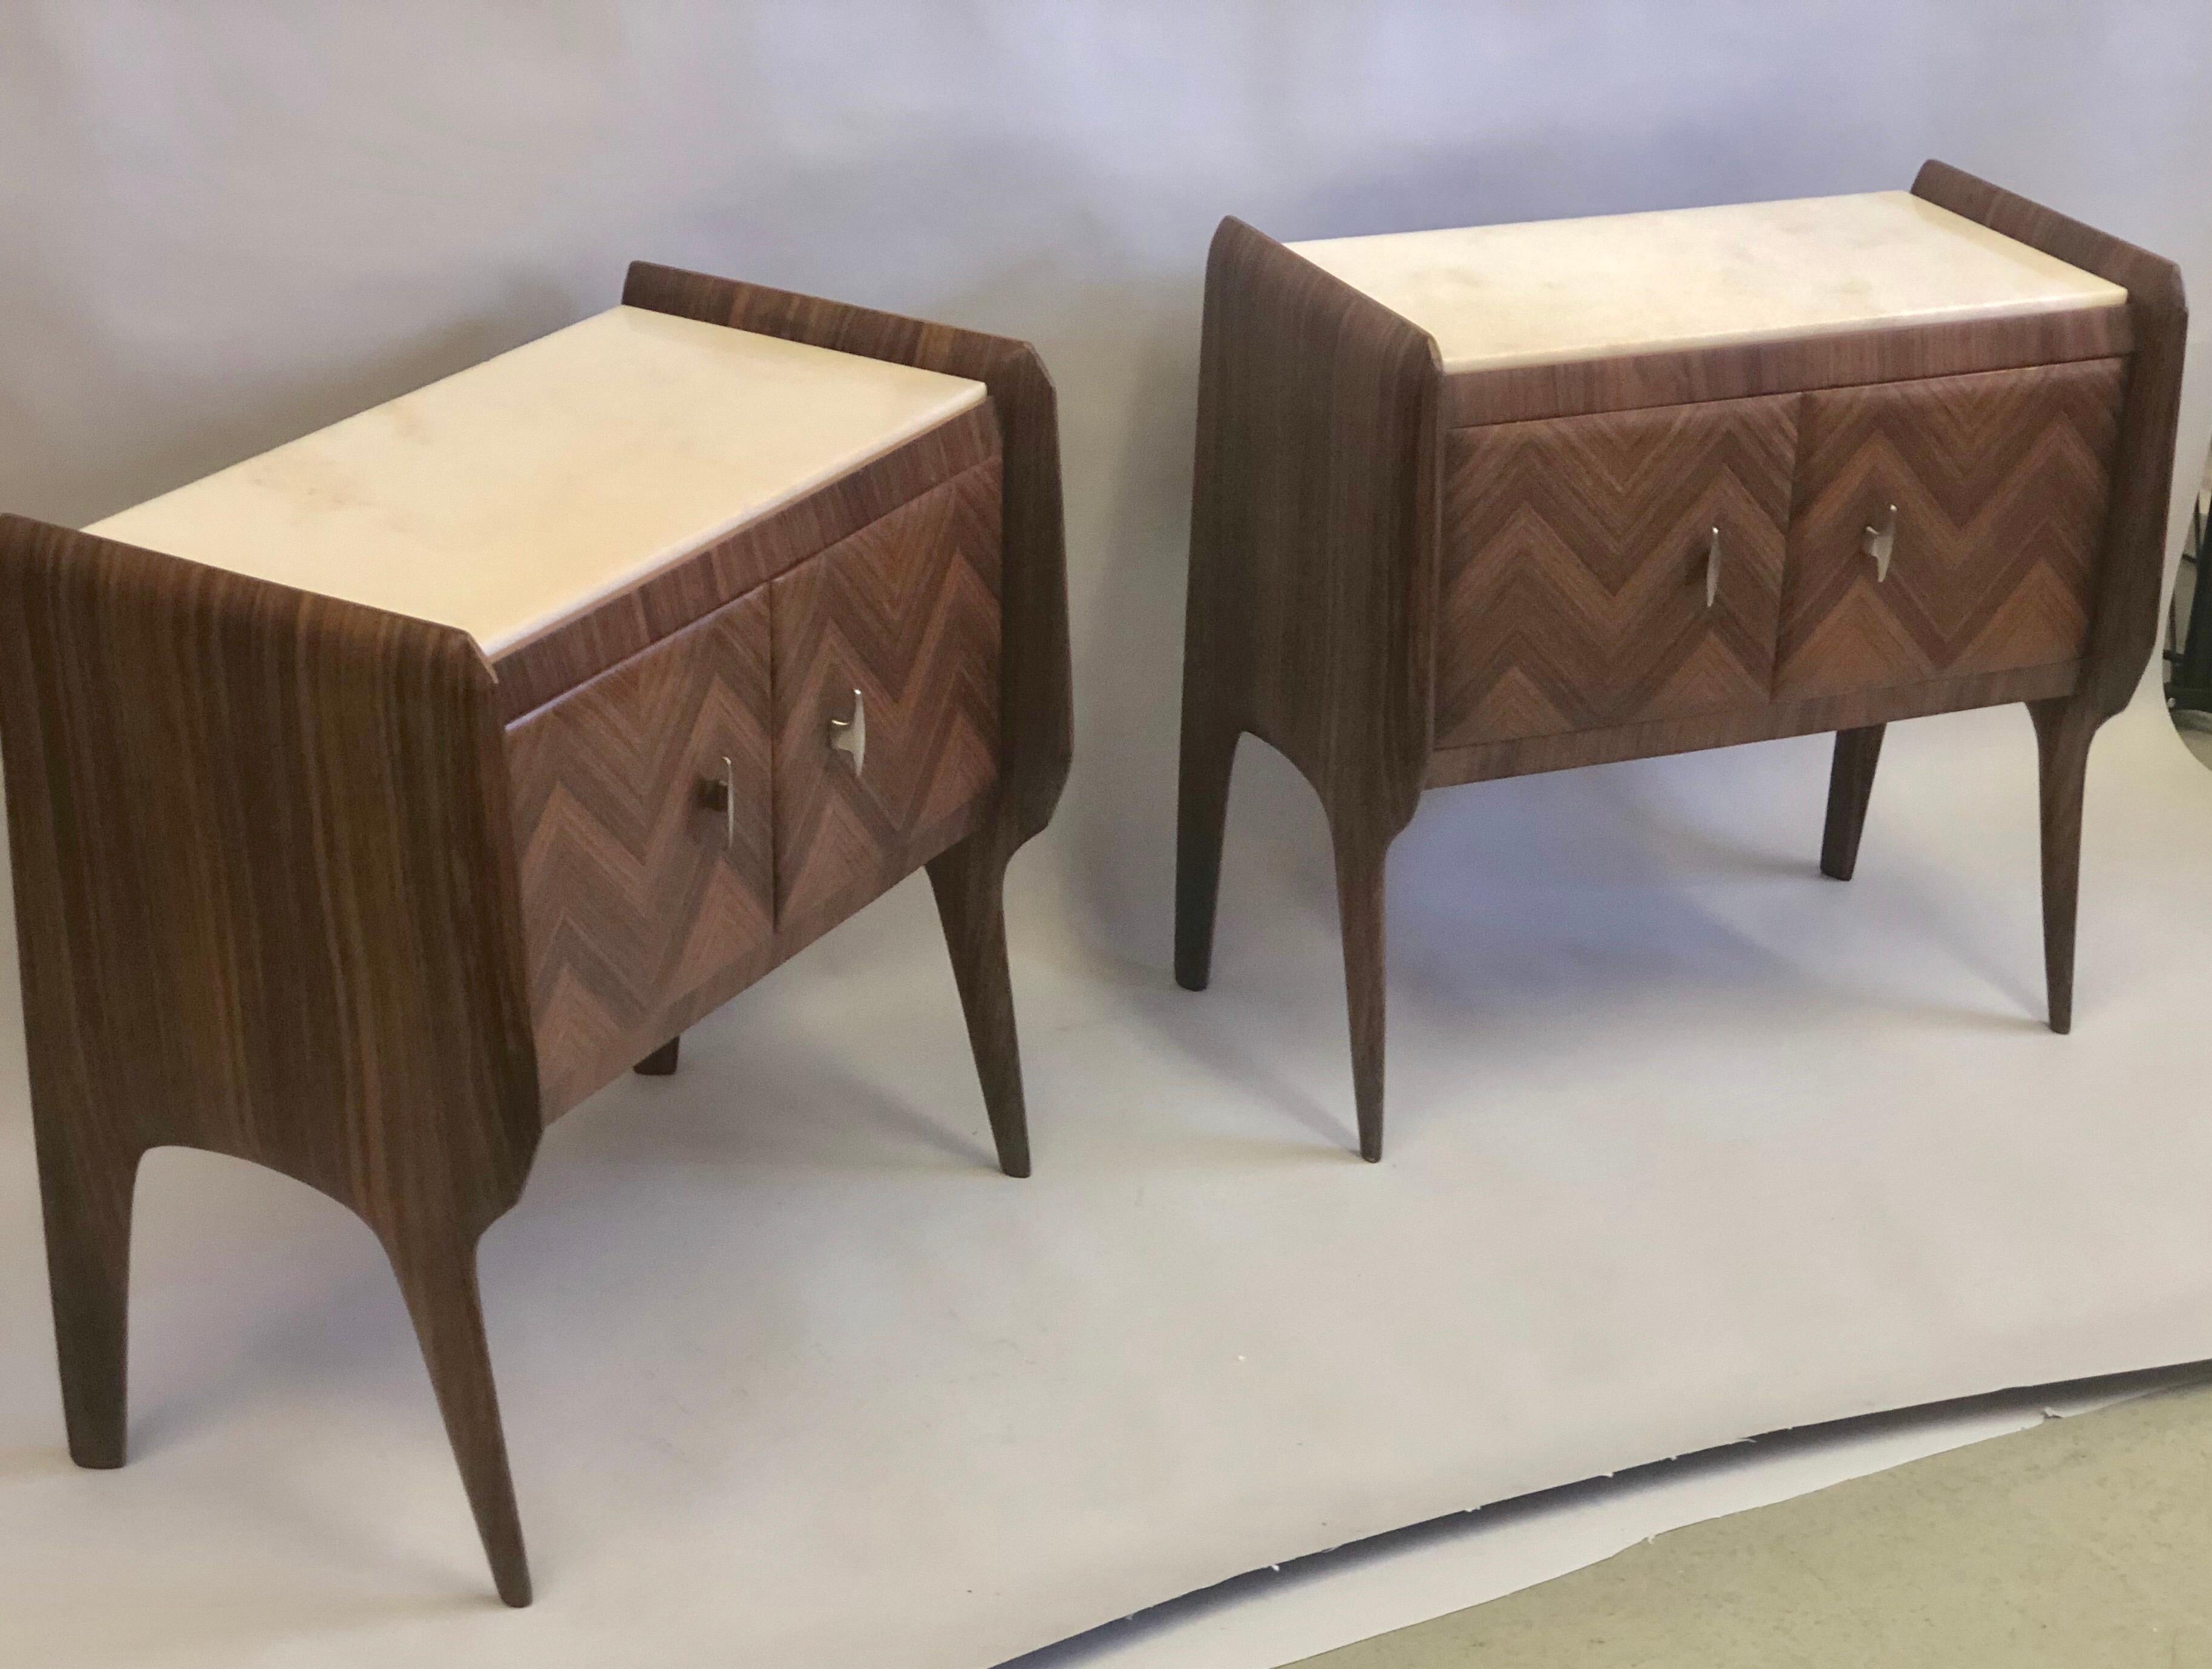 Pair of Italian Mid-Century Modern nightstands / end tables / side tables attributed to Osvaldo Borsani. Inlaid mahogany in chevron pattern with white marble tops. Doors open and contain storage.